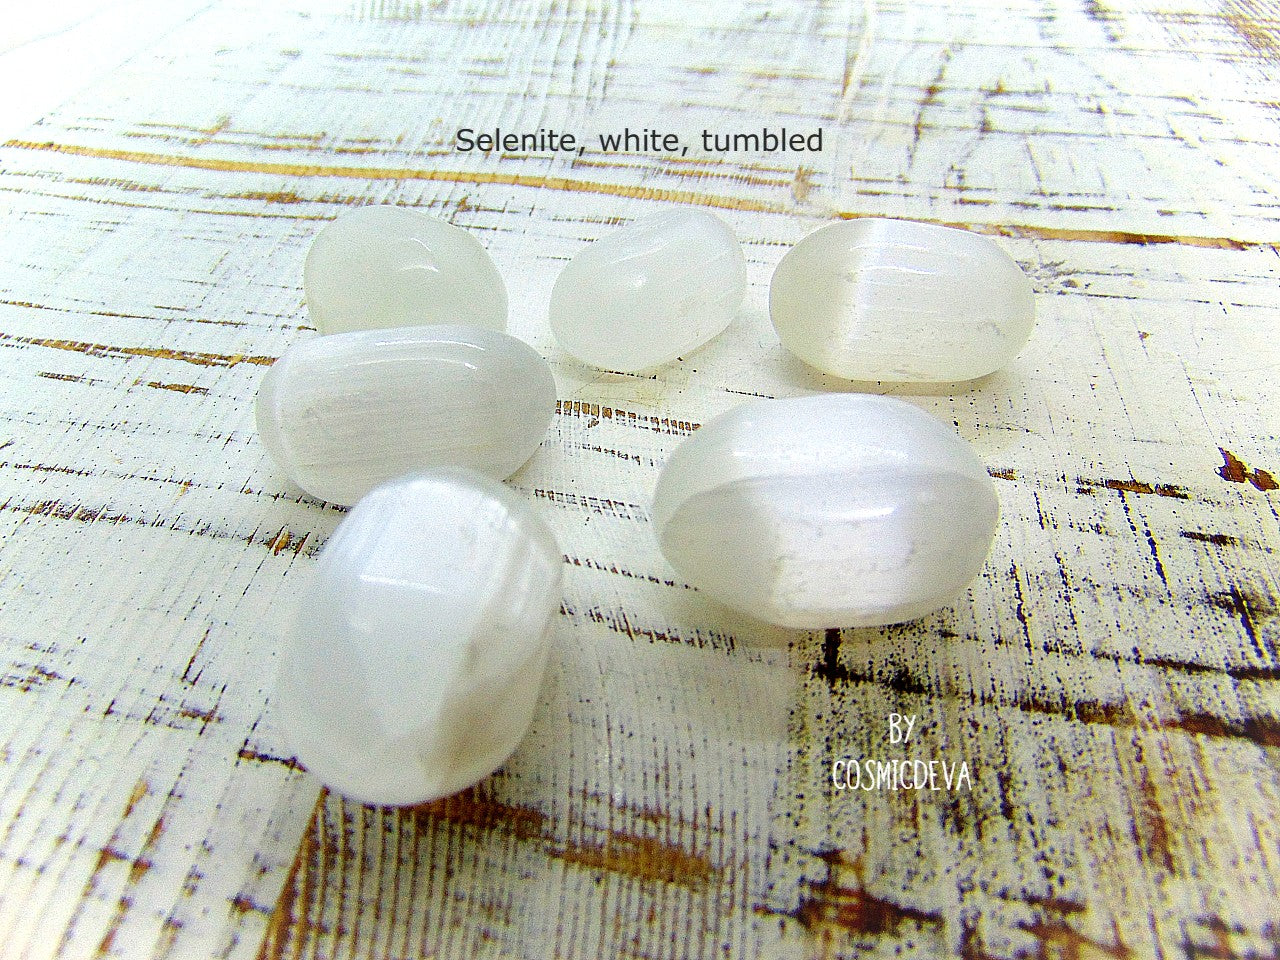 You get one white selenite soothing pocket stone similar to the ones pictured. Please note that selenite will break down and dissolve in water Selenite is a crystallized form of Gypsum .The main distinguishing characteristics of crystalline gypsum are its softness hardness 2